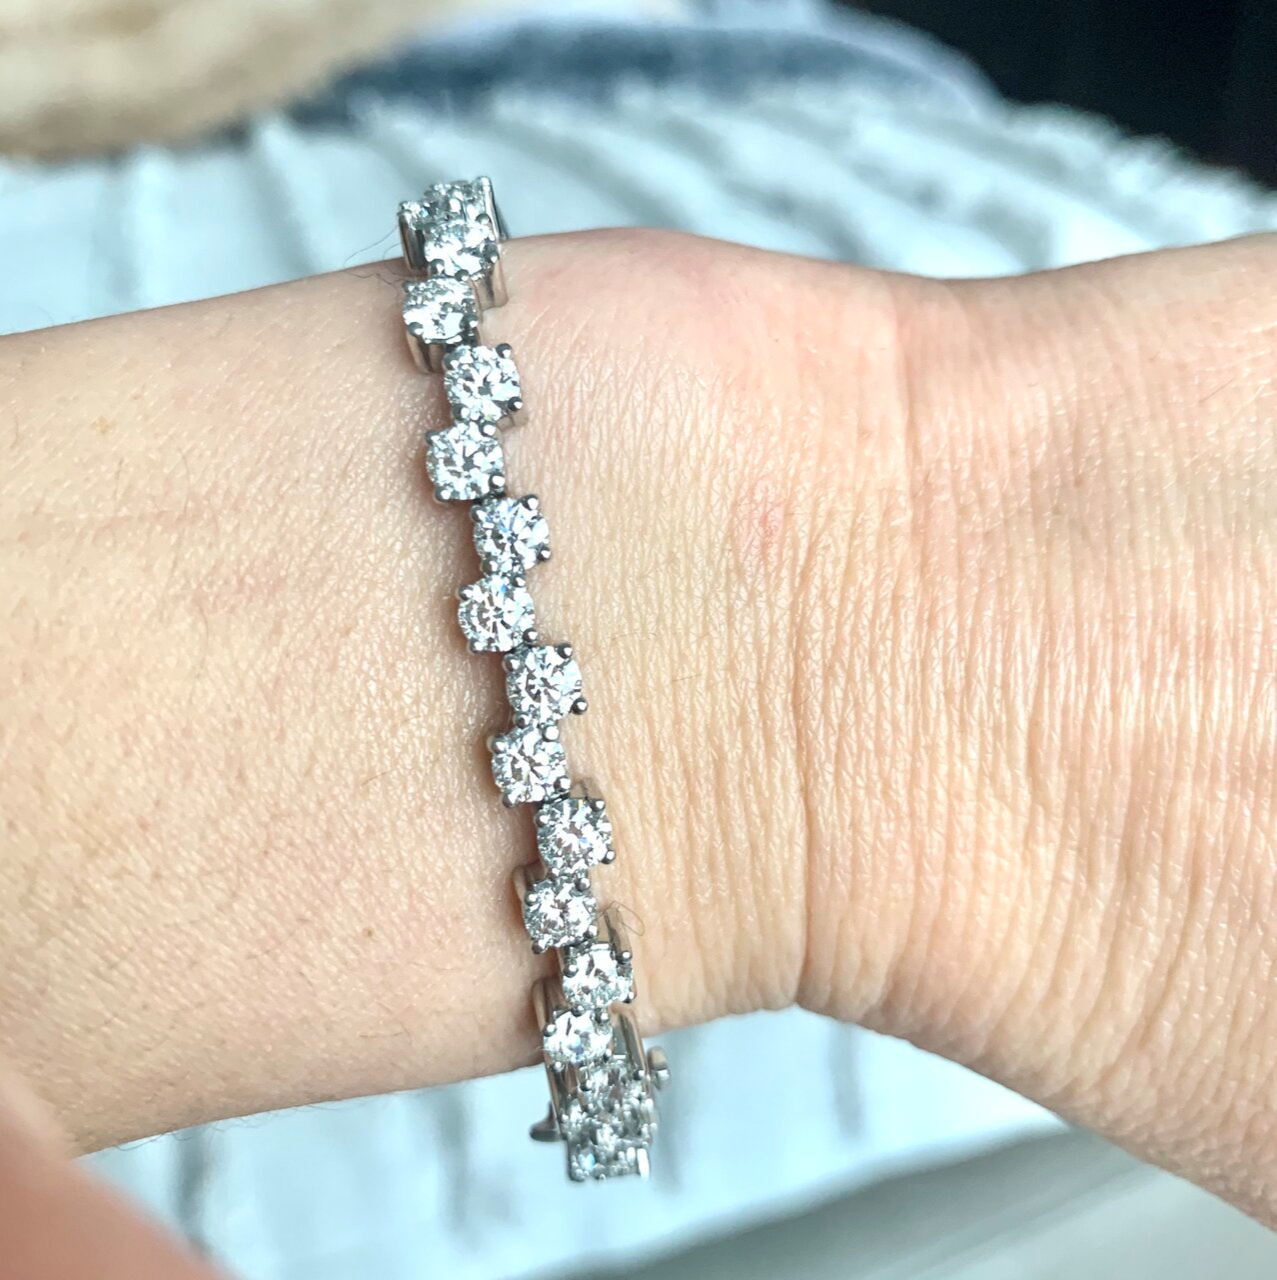 Chantek pics of her stunning diamond bracelet on the Show Me the Bling forum at PriceScope!  These glorious Whiteflash ACAs display a ton of sparkle! What looks would you pair this beauty with?